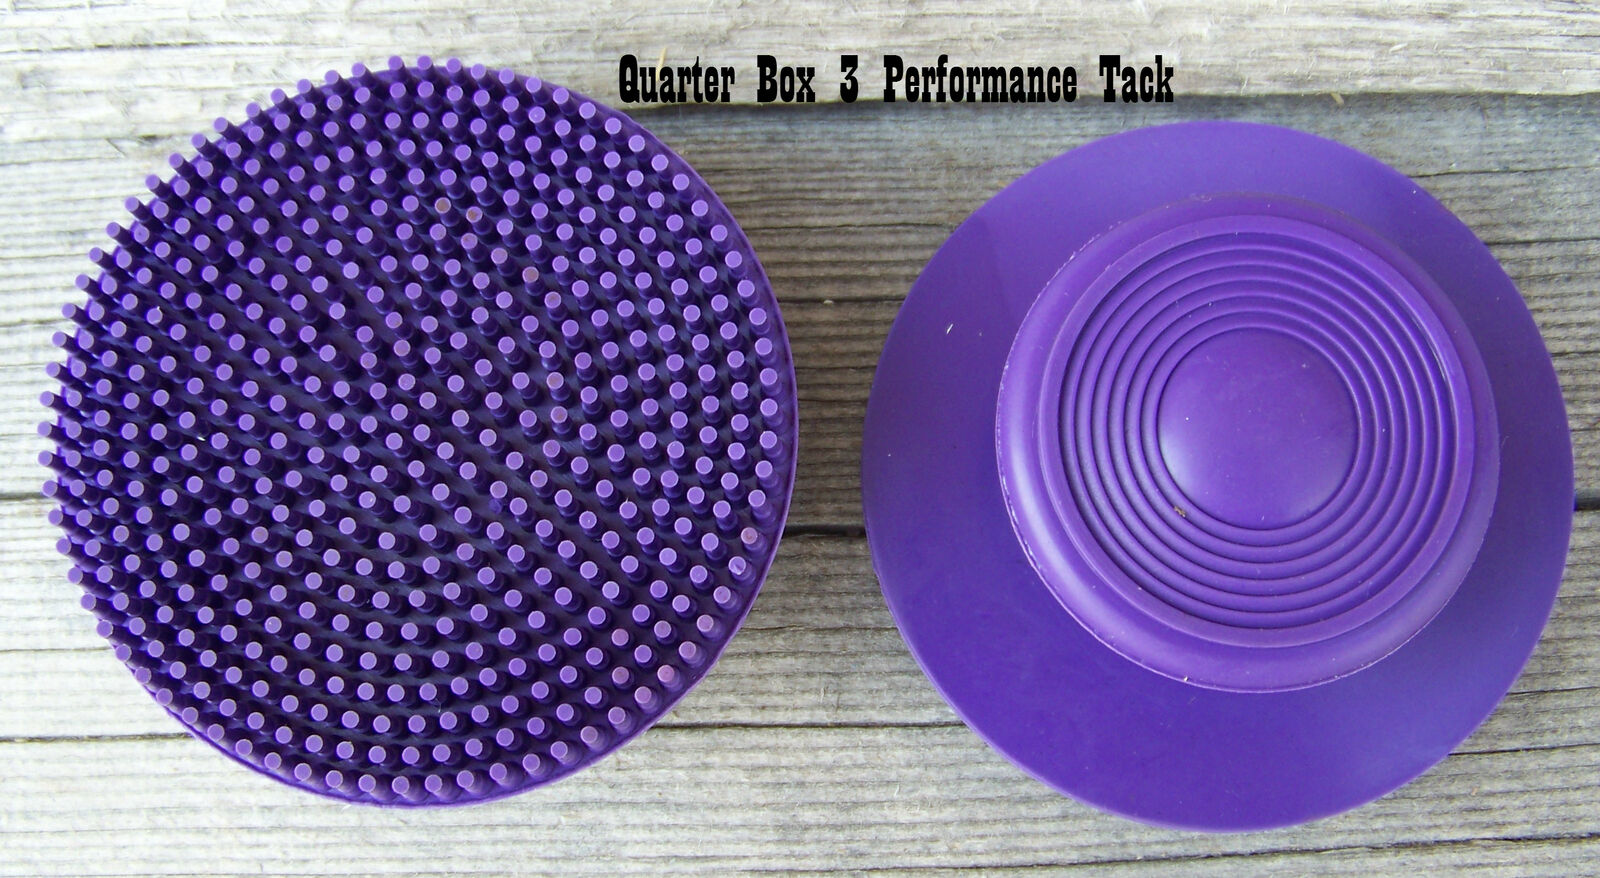 Curry - Soft Rubber Round Face (purple)